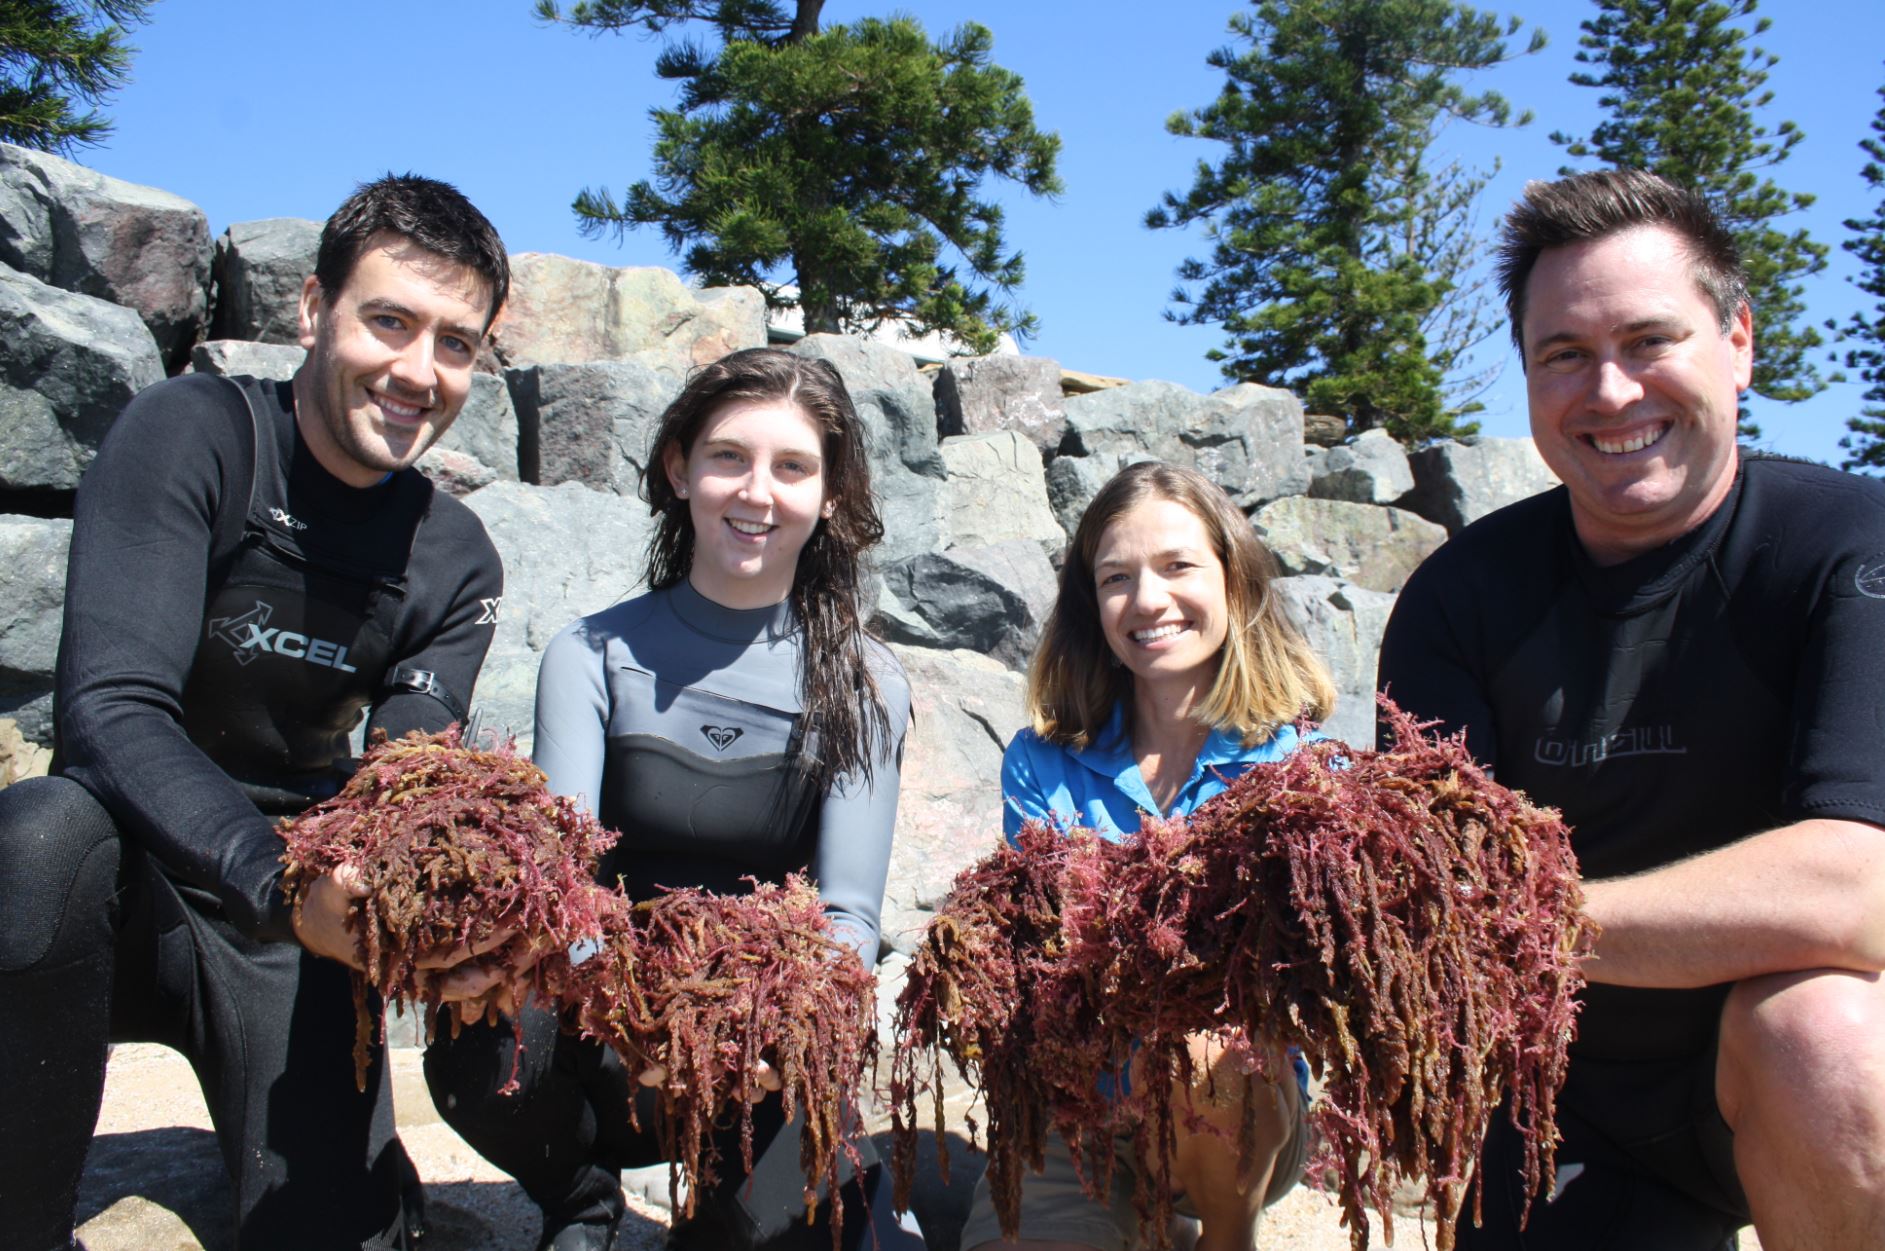 The USC team is working to learn more about how to grow the seaweed species, hoping to scale up production.